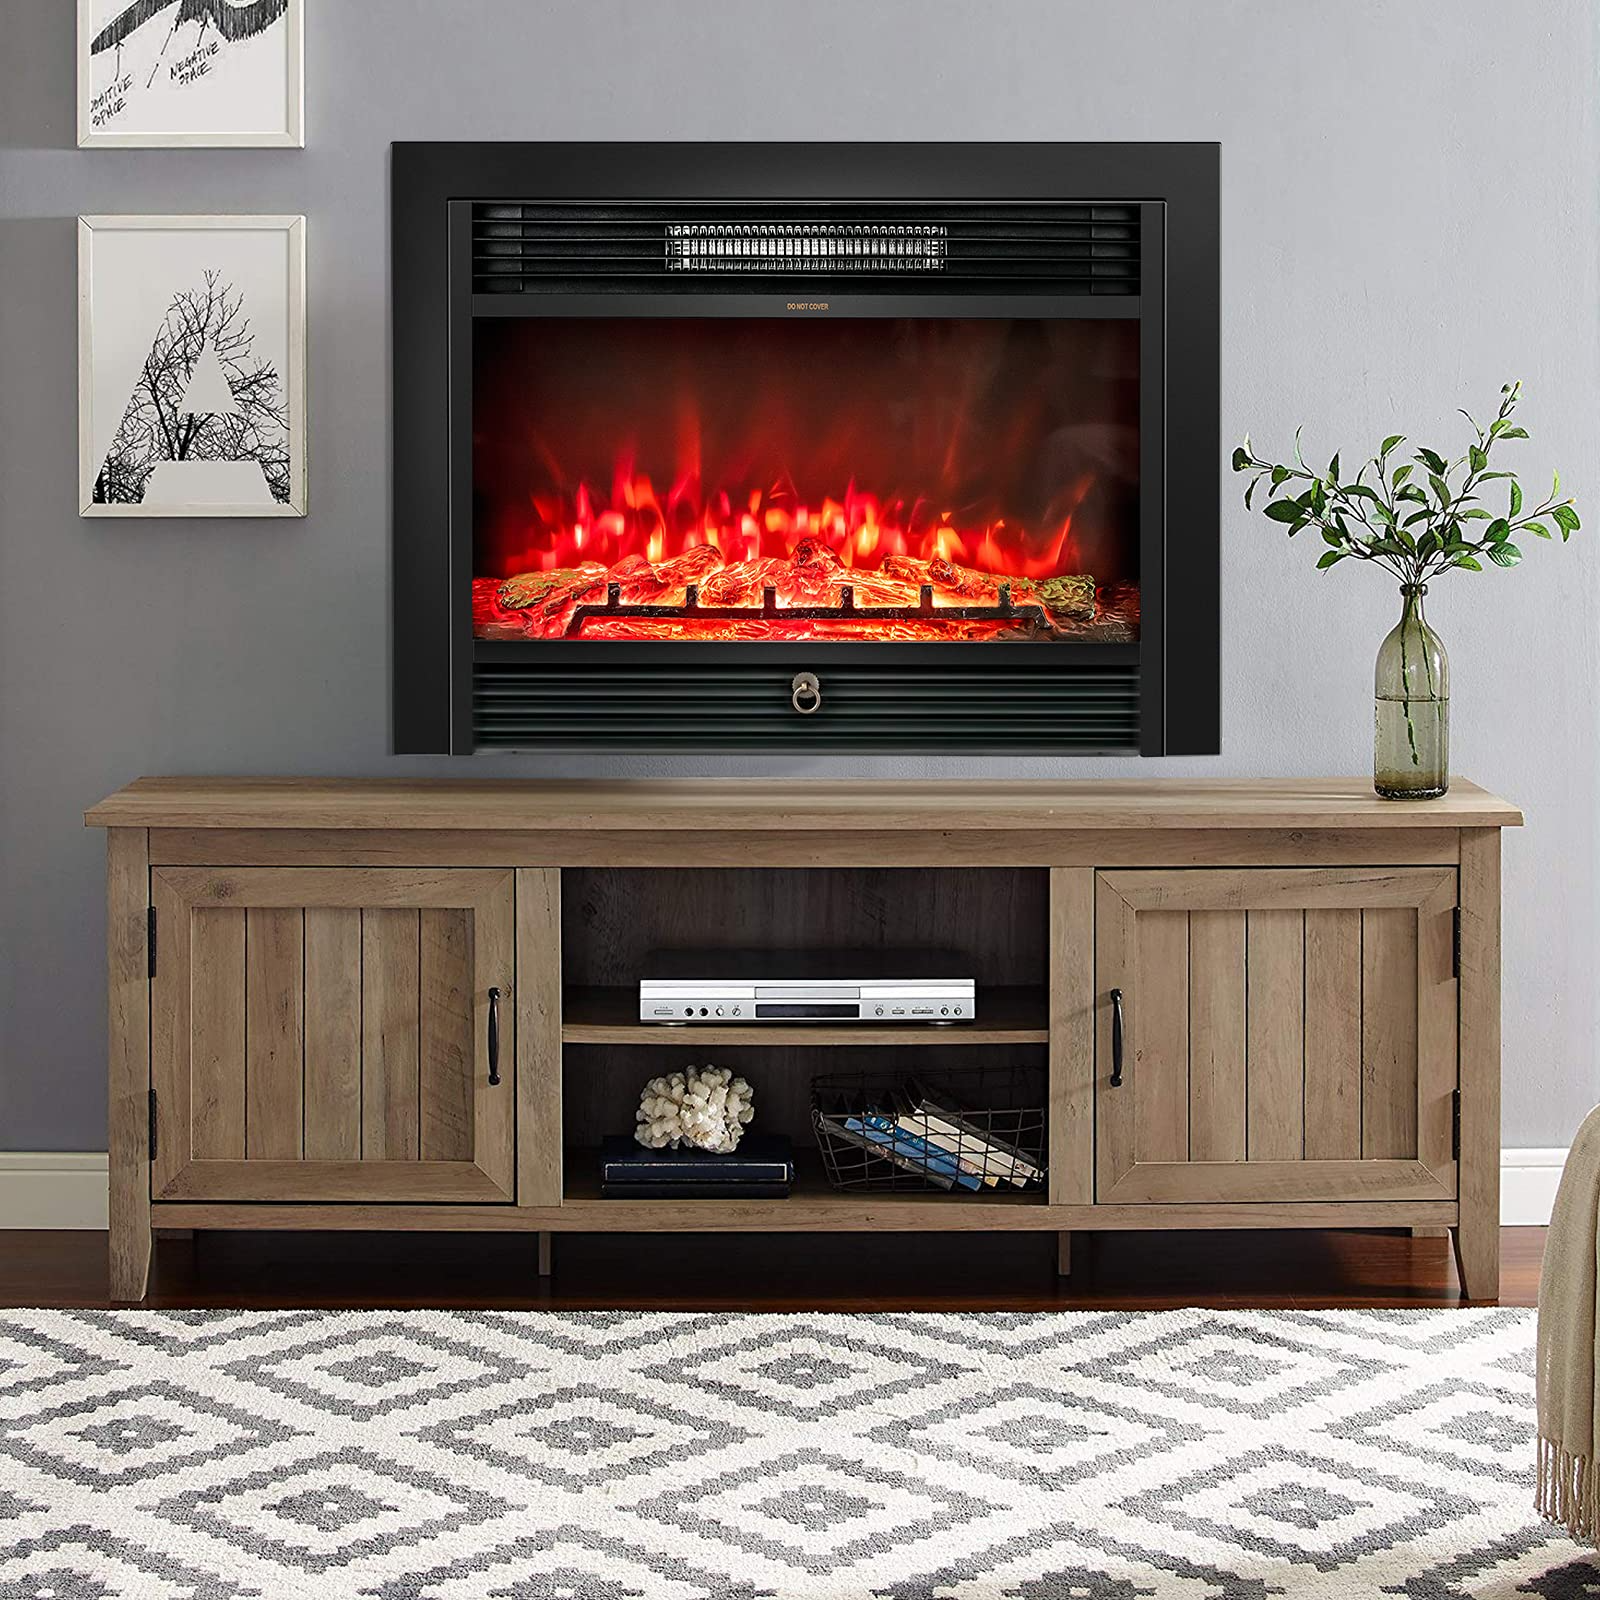 28.5 Inches Recessed Electric Fireplace Insert - Tangkula